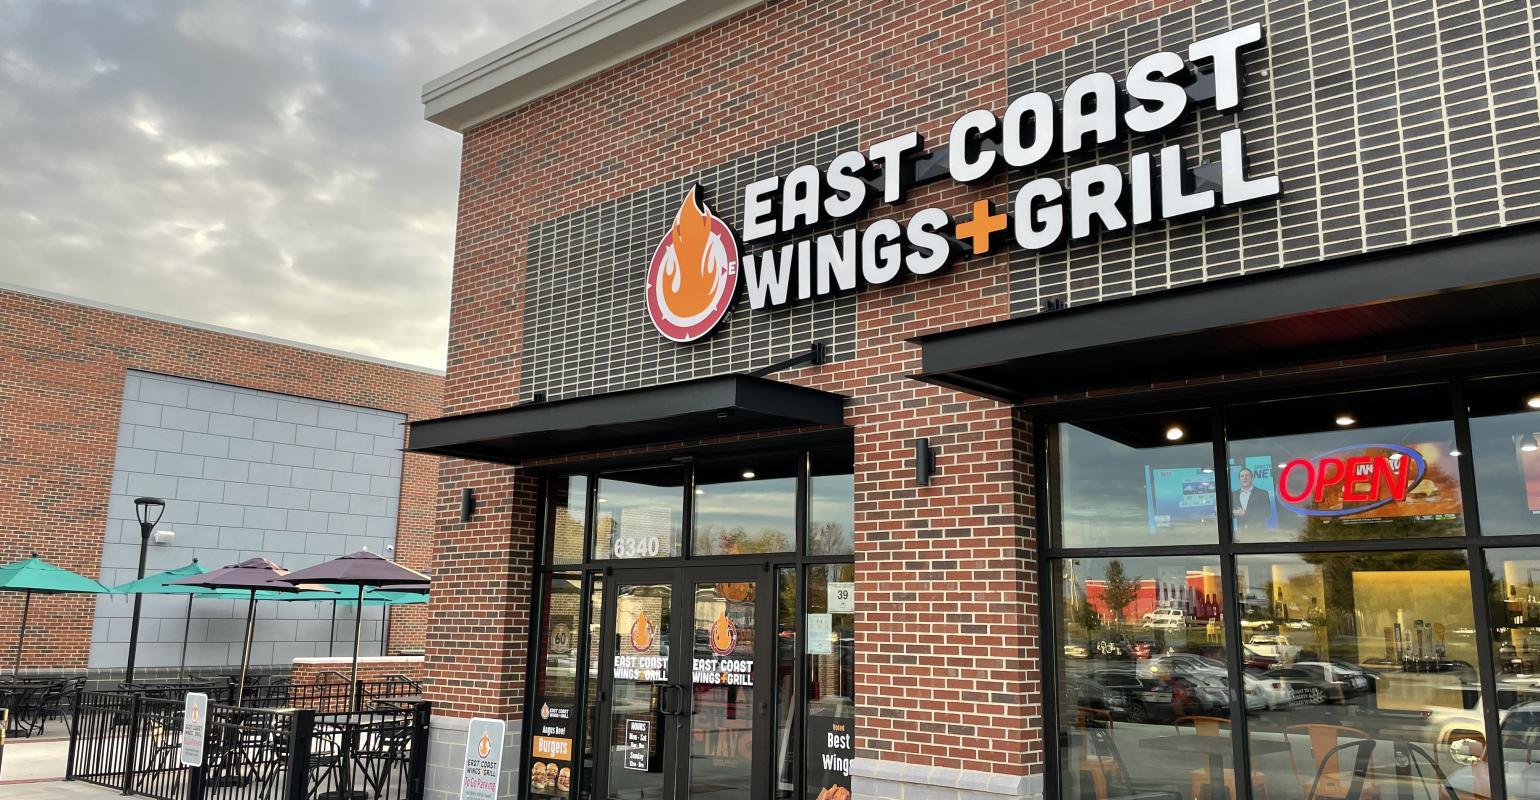 East Coast Wings and Grill - The Best Restaurant Franchise